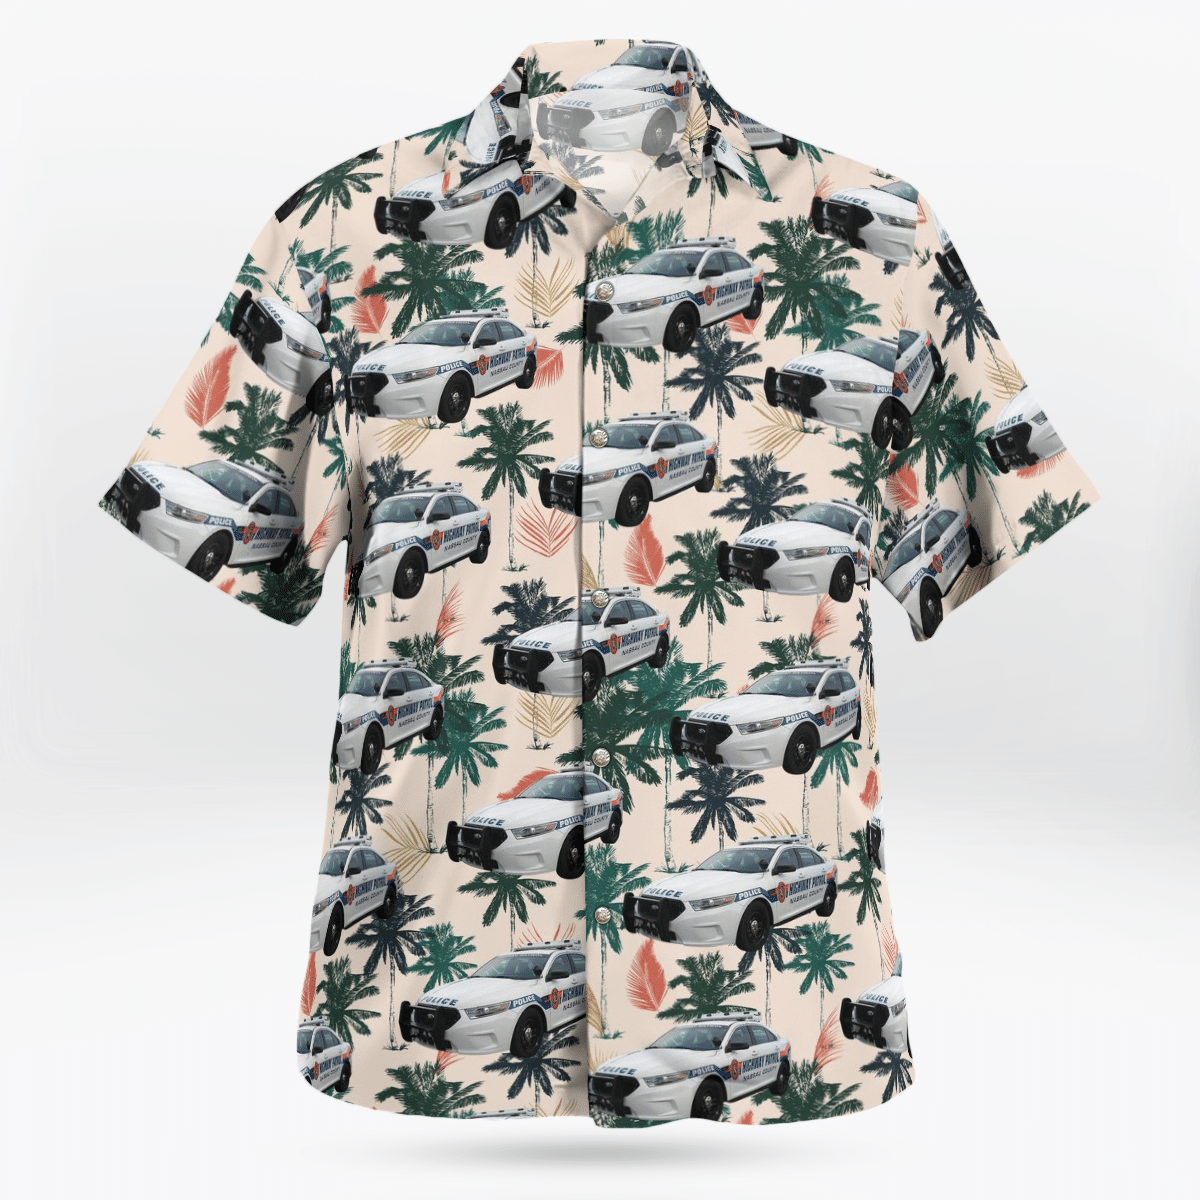 Hawaiian shirts never go out of style 55